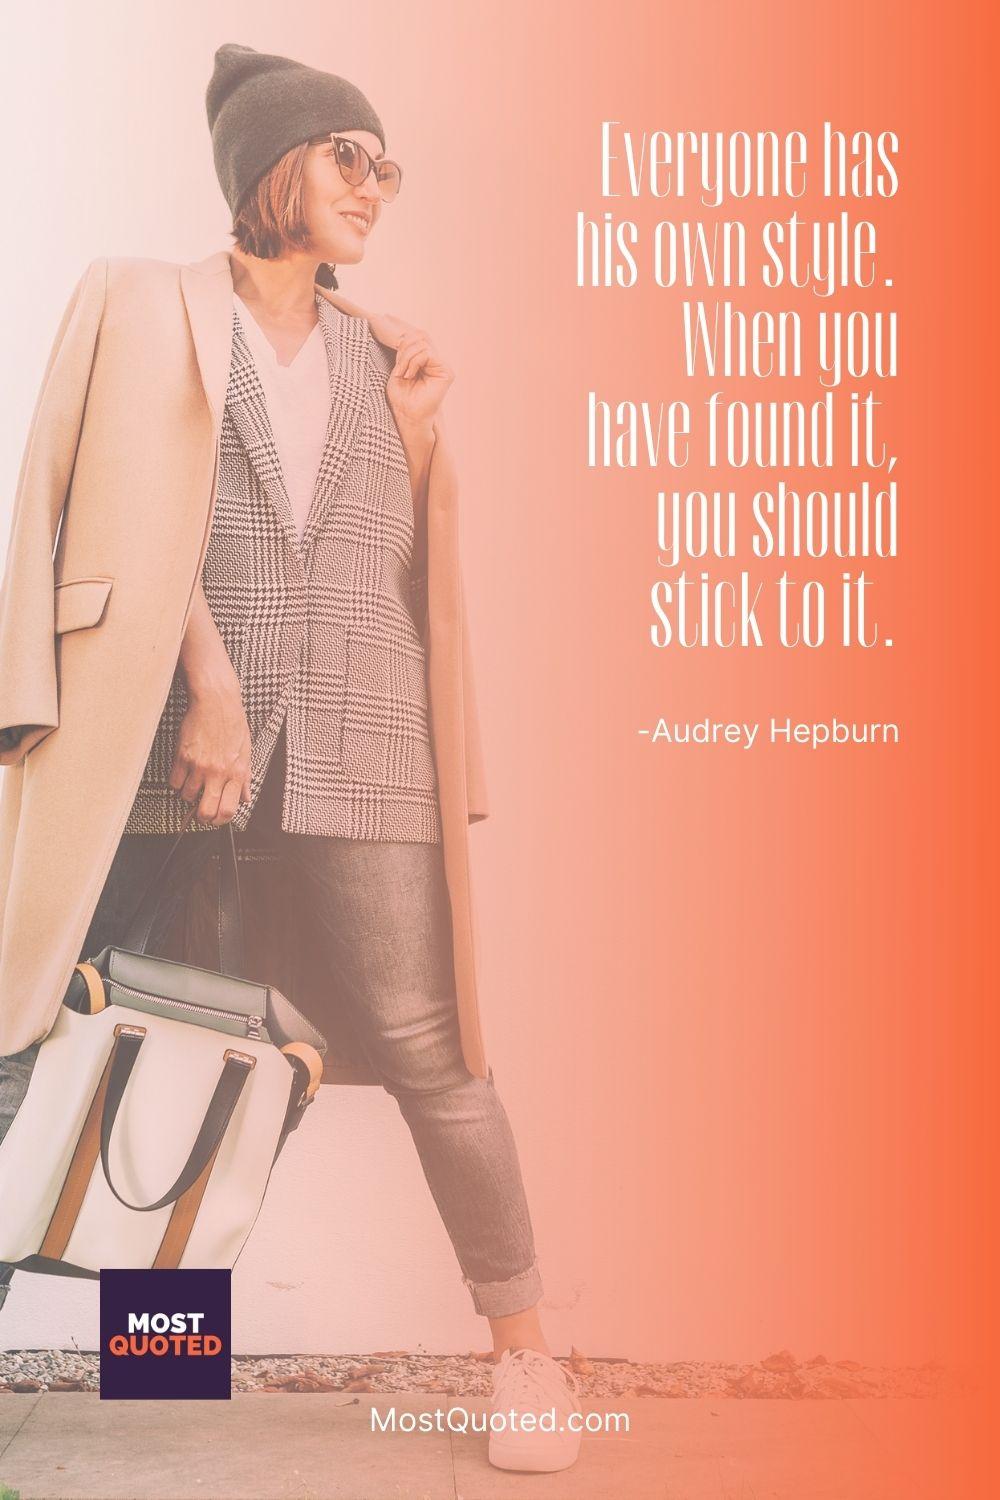 Why change? Everyone has his own style. When you have found it, you should stick to it. - Audrey Hepburn